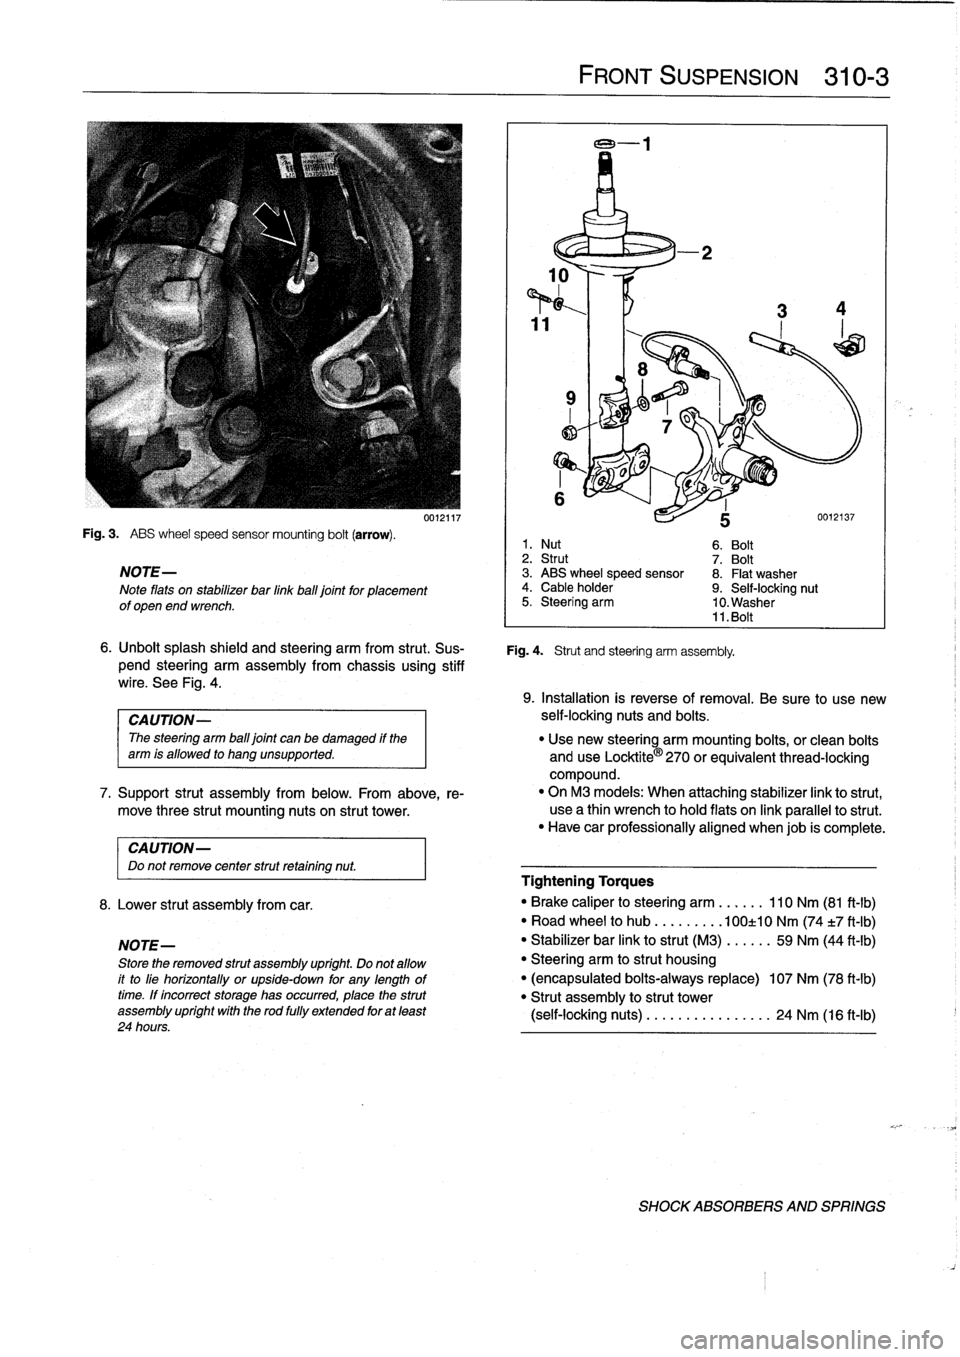 BMW 318i 1995 E36 Workshop Manual 
Fig
.
3
.

	

ABS
wheel
speed
sensor
mounting
bolt
(arrow)
.

NOTE-

Note
flats
on
stabilizer
bar
linkball
joint
for
placement
of
open
end
wrench
.

CAUTION-
Do
not
remove
center
strut
retaining
nut
